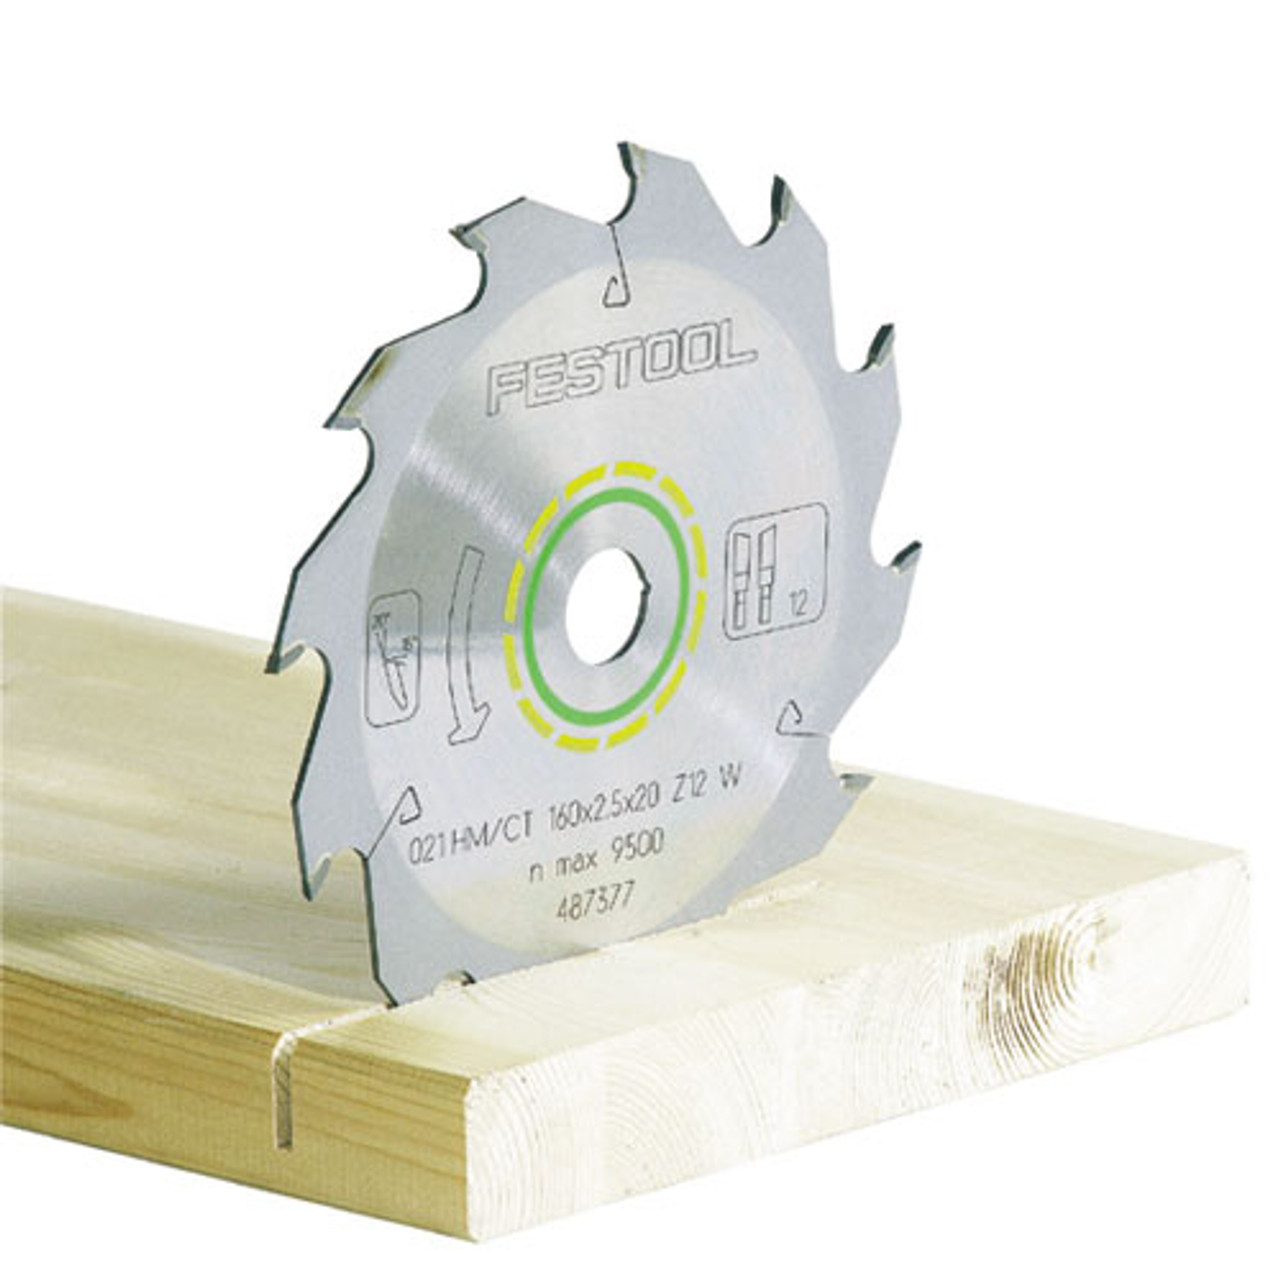 Festool 495379 Standard Ripping Blade For TS 75 Plunge Cut Saw 18 Tooth